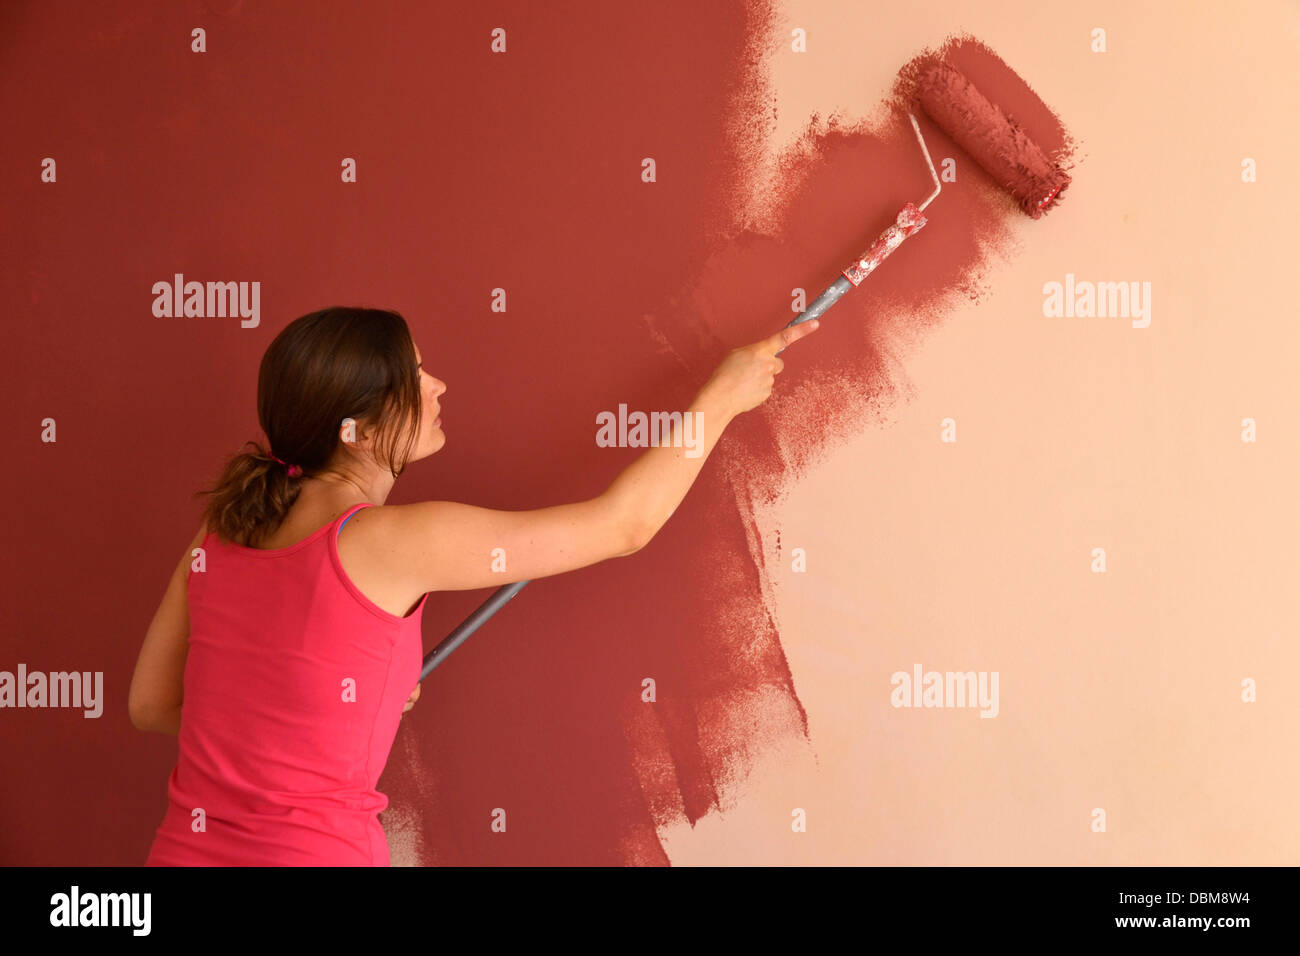 Beautiful Young Woman In Causal Clothes Painting A Wall With Red